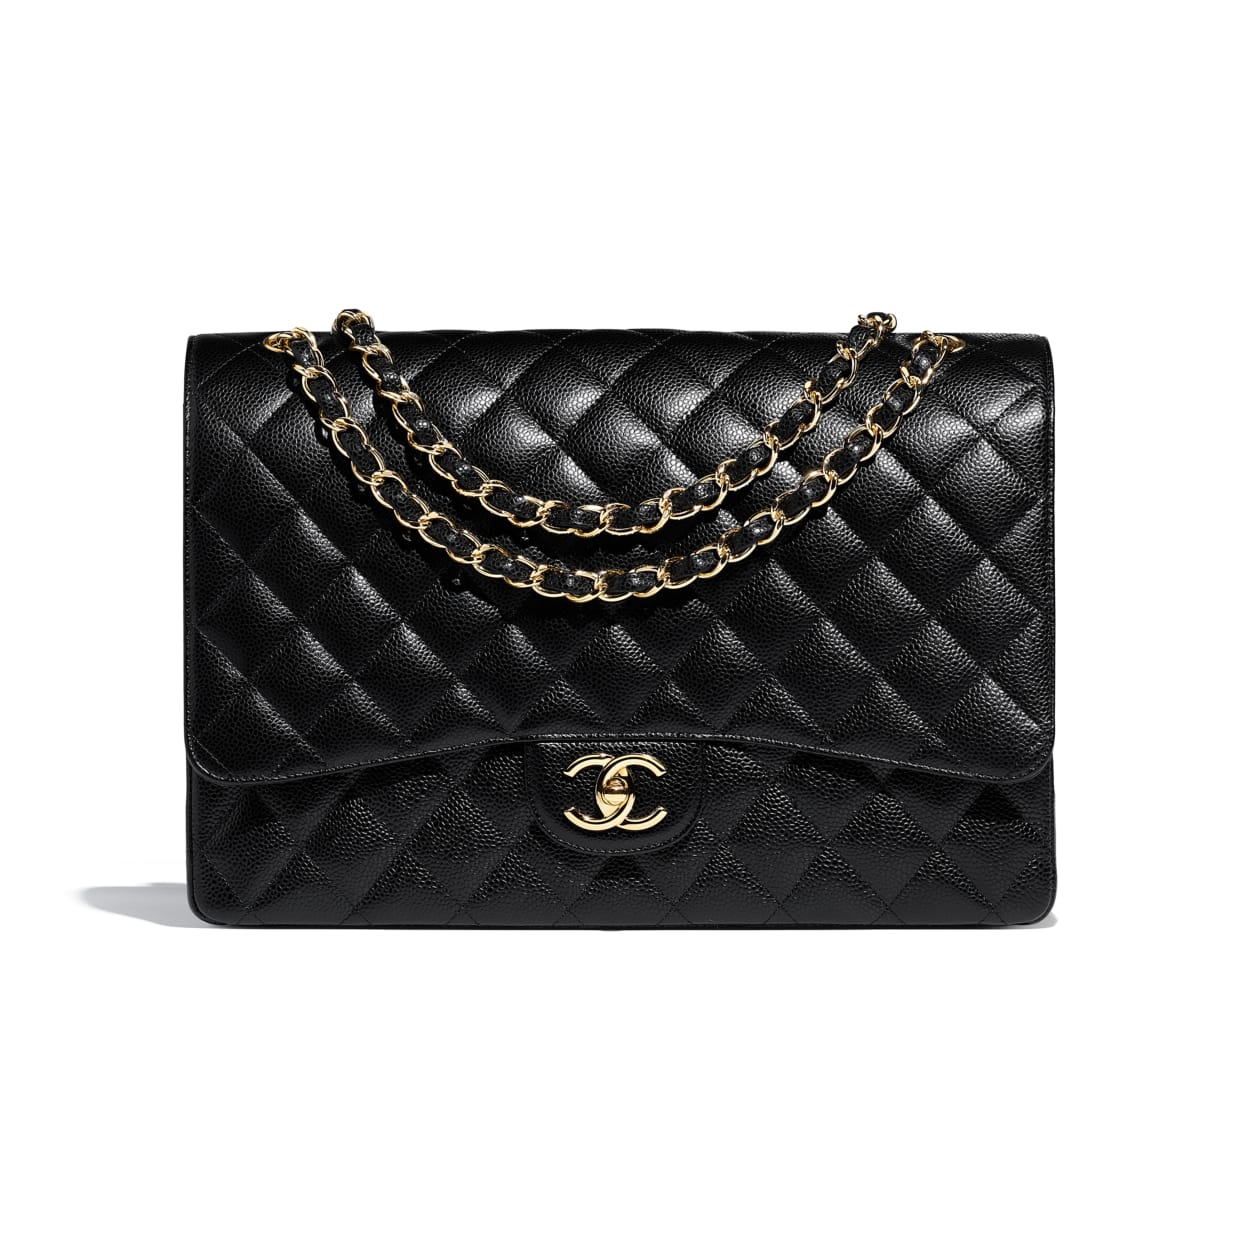 price range for chanel bags